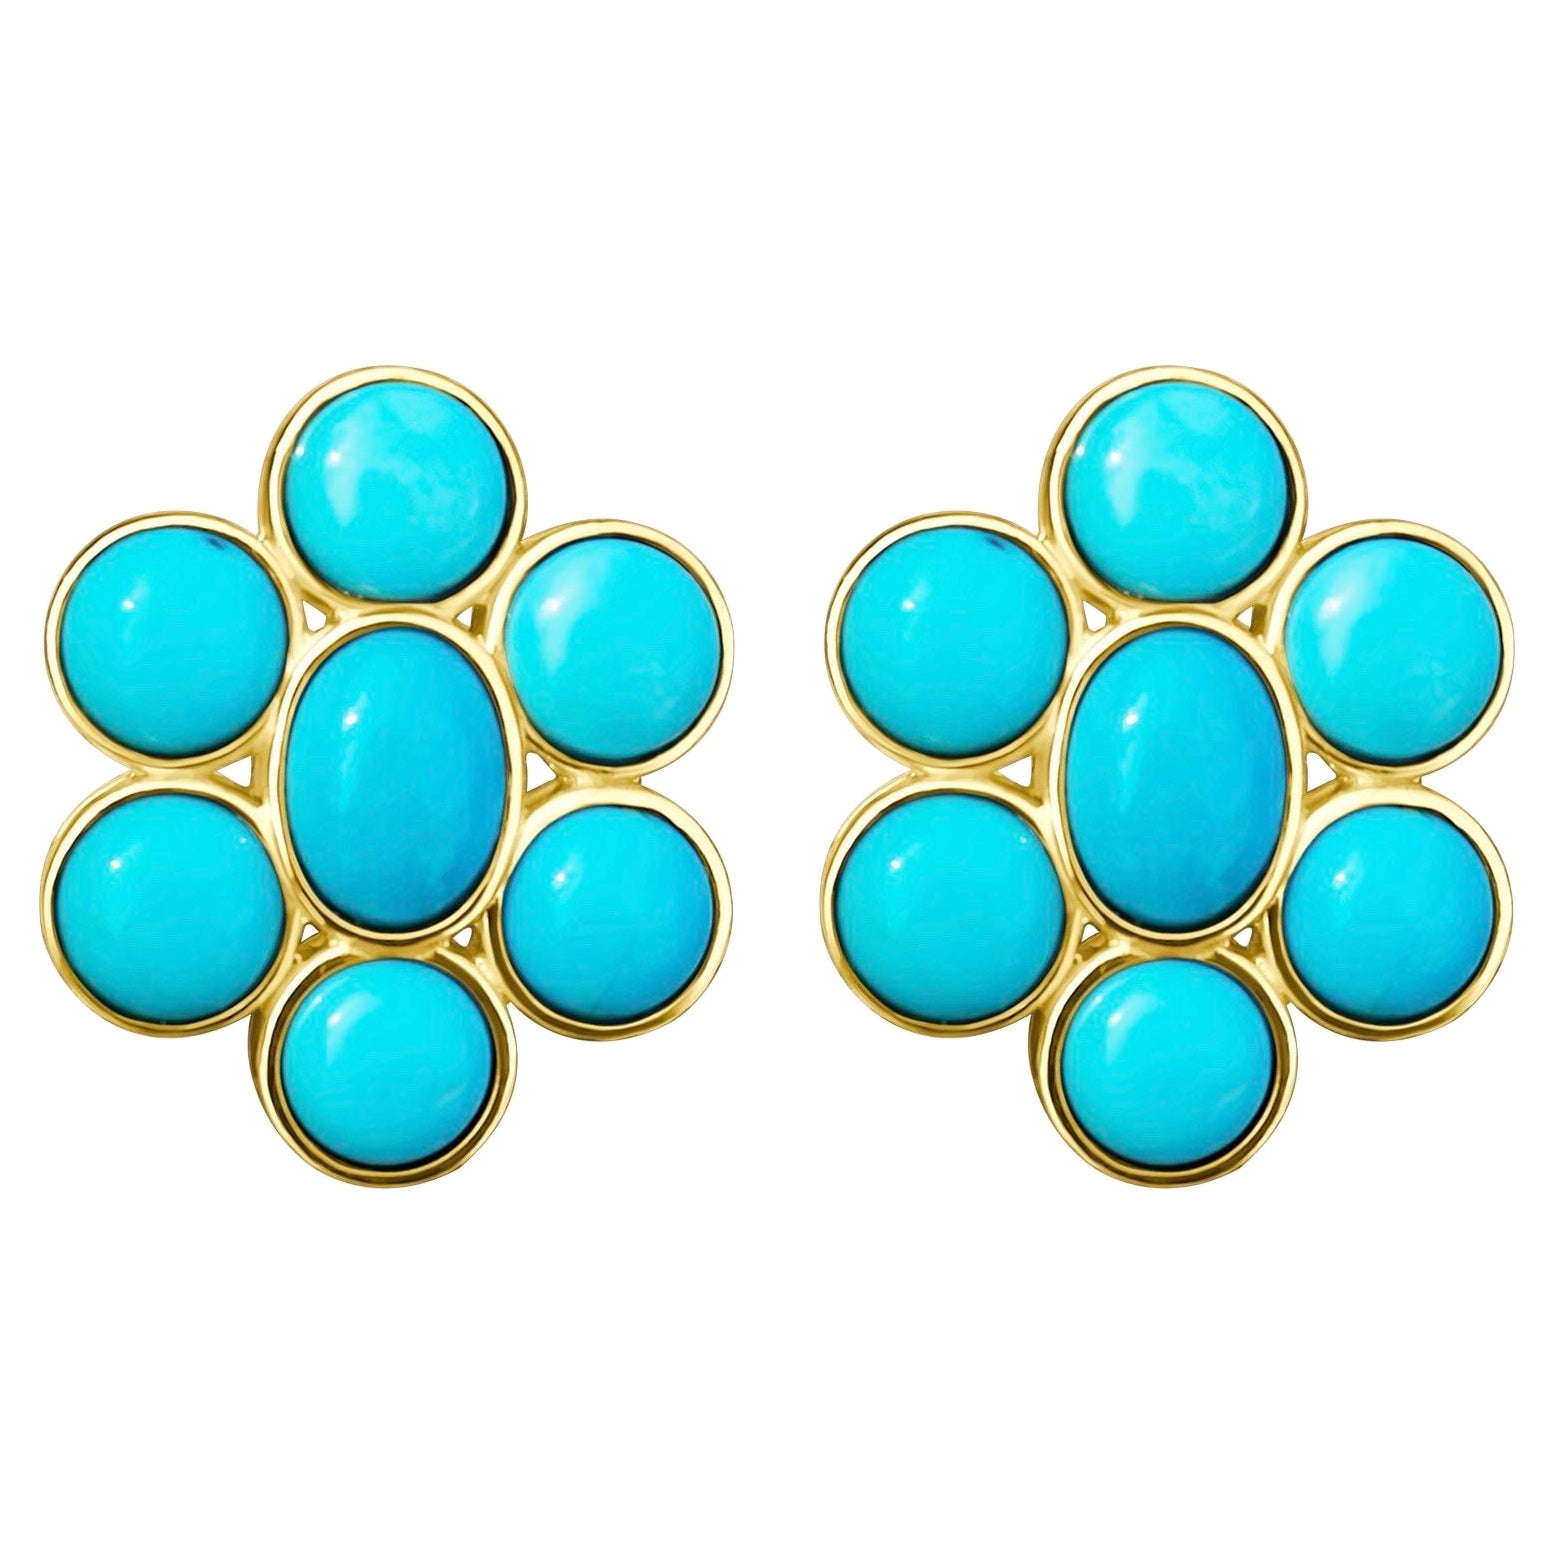 Nina Zhou 8ct Blue Turquoise Gemstone Cluster Earrings in 18k Yellow Gold For Sale